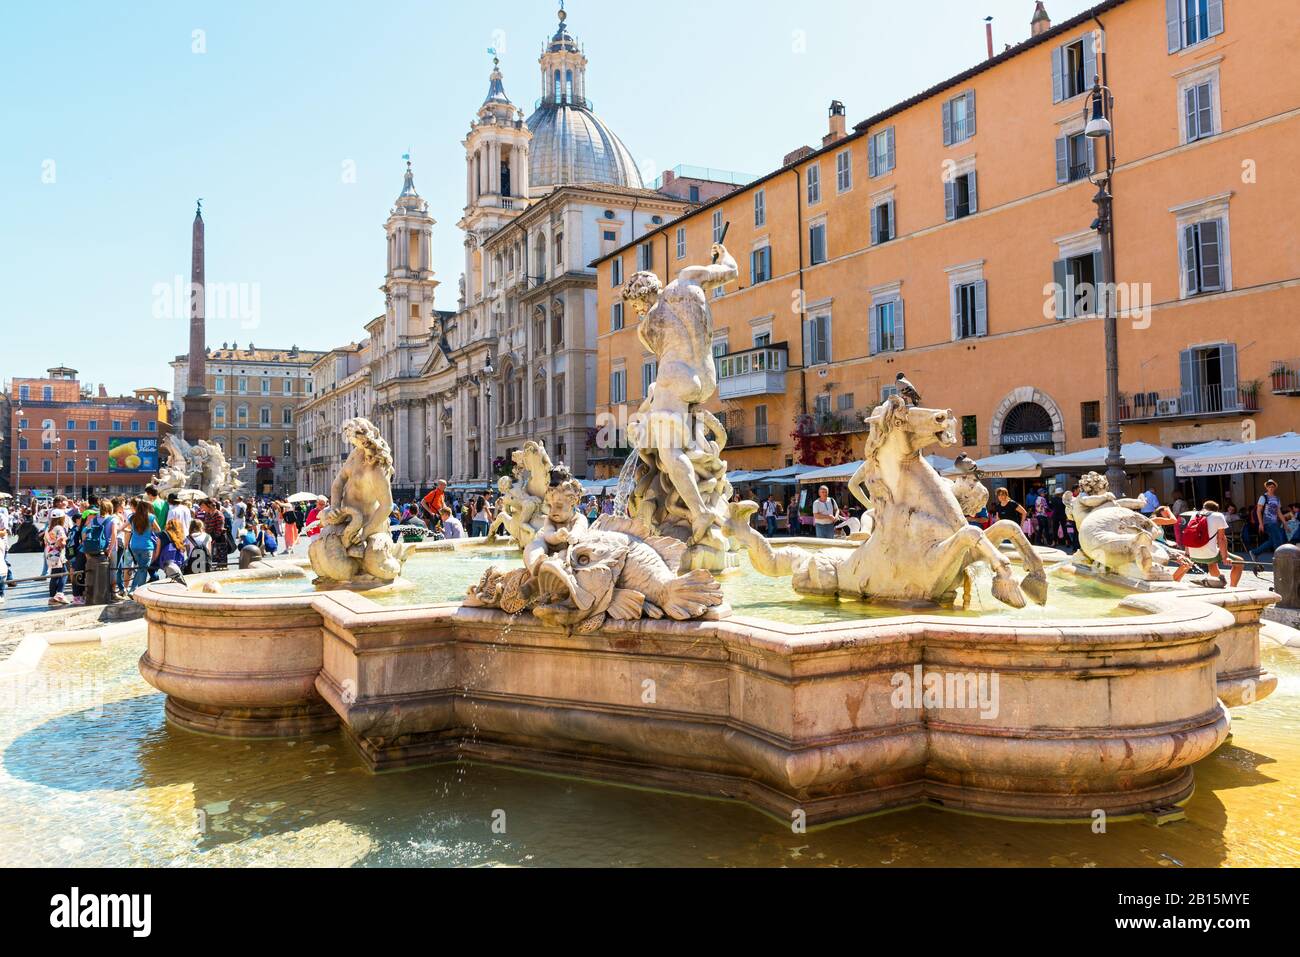 ROME, ITALY - MAY 9, 2014: Fountain of Neptune at the Piazza Navona. Piazza Navona is one of the main tourist attractions of Rome. Stock Photo